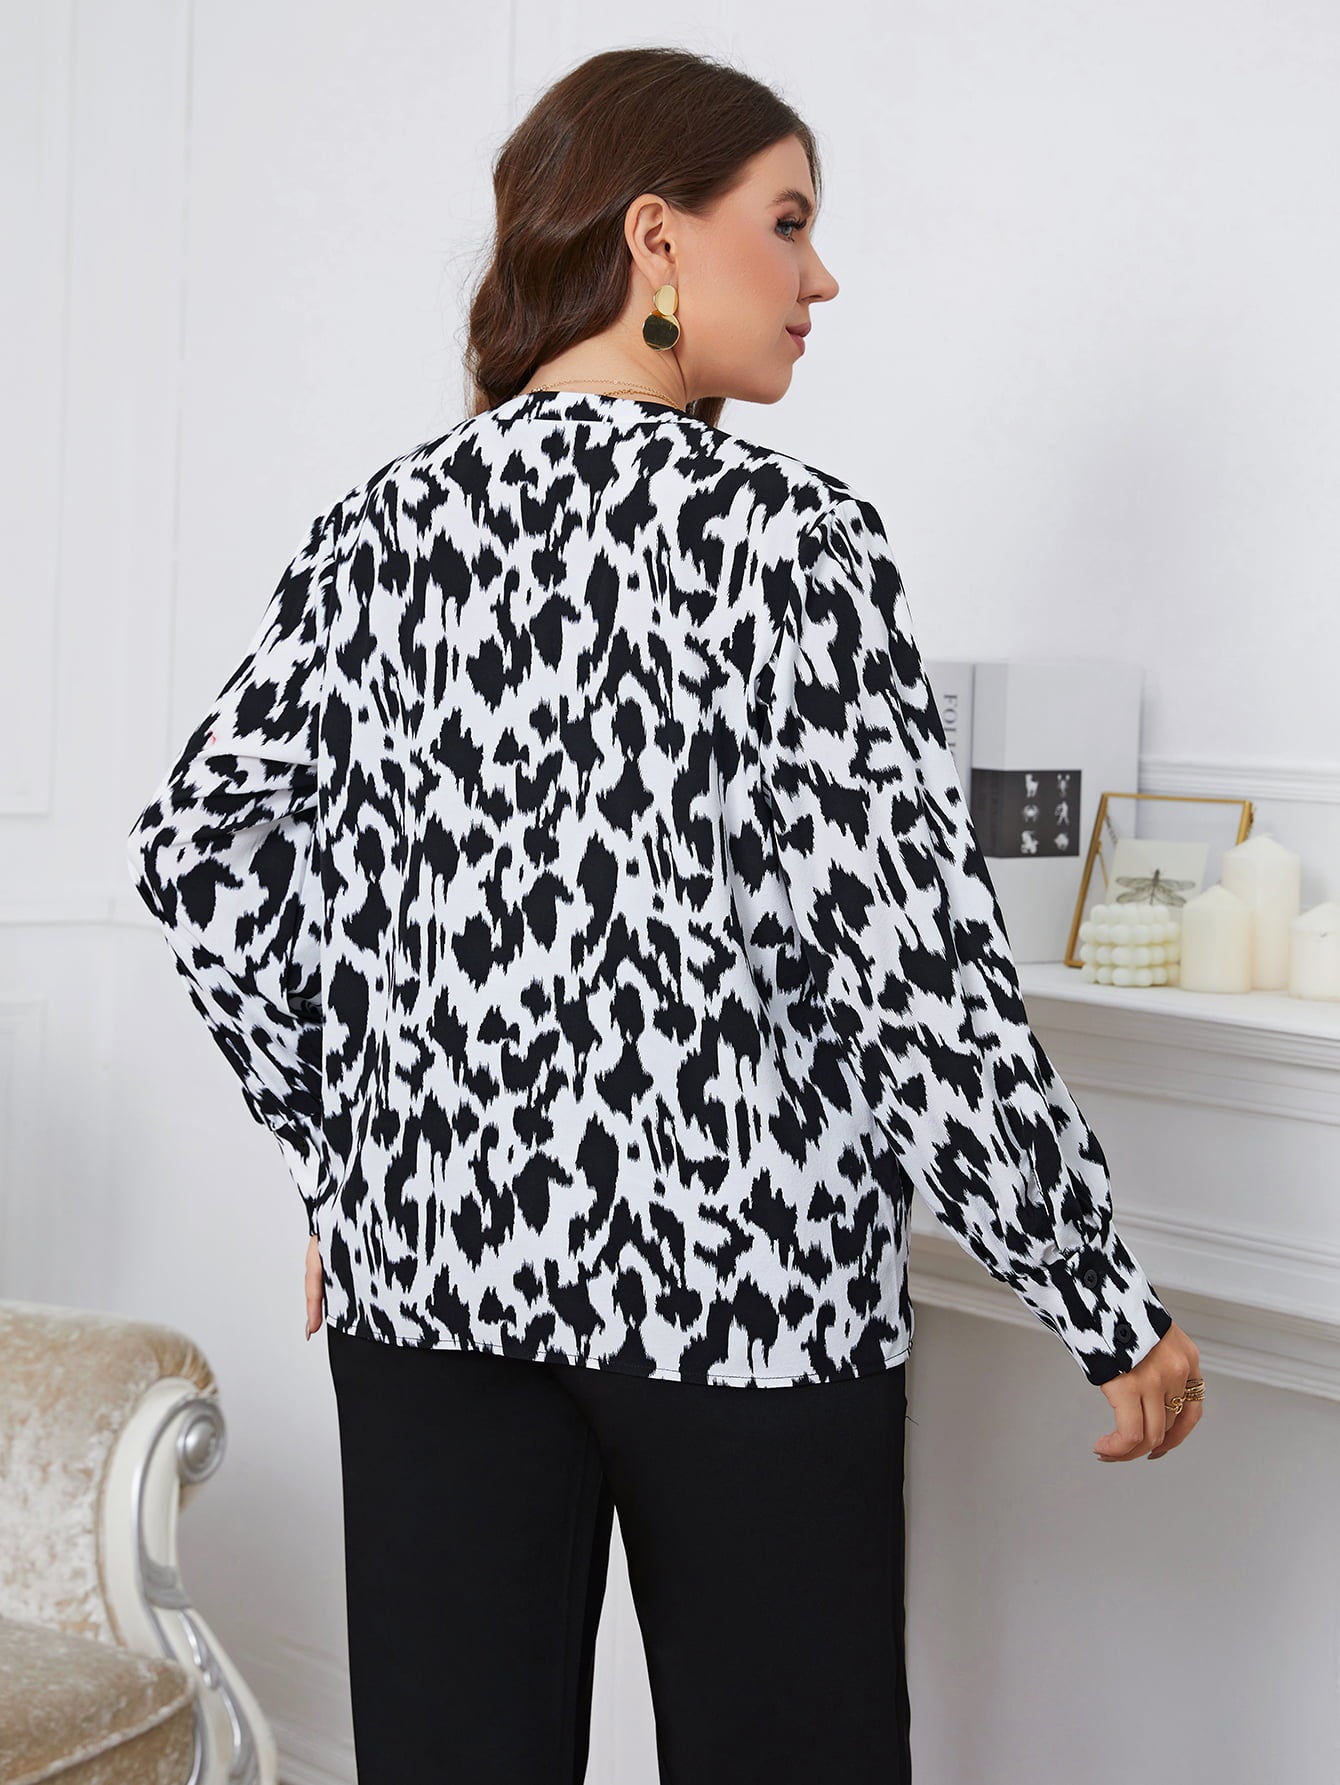 Melo Apparel Plus Size Printed Long Sleeve V-Neck Blouse